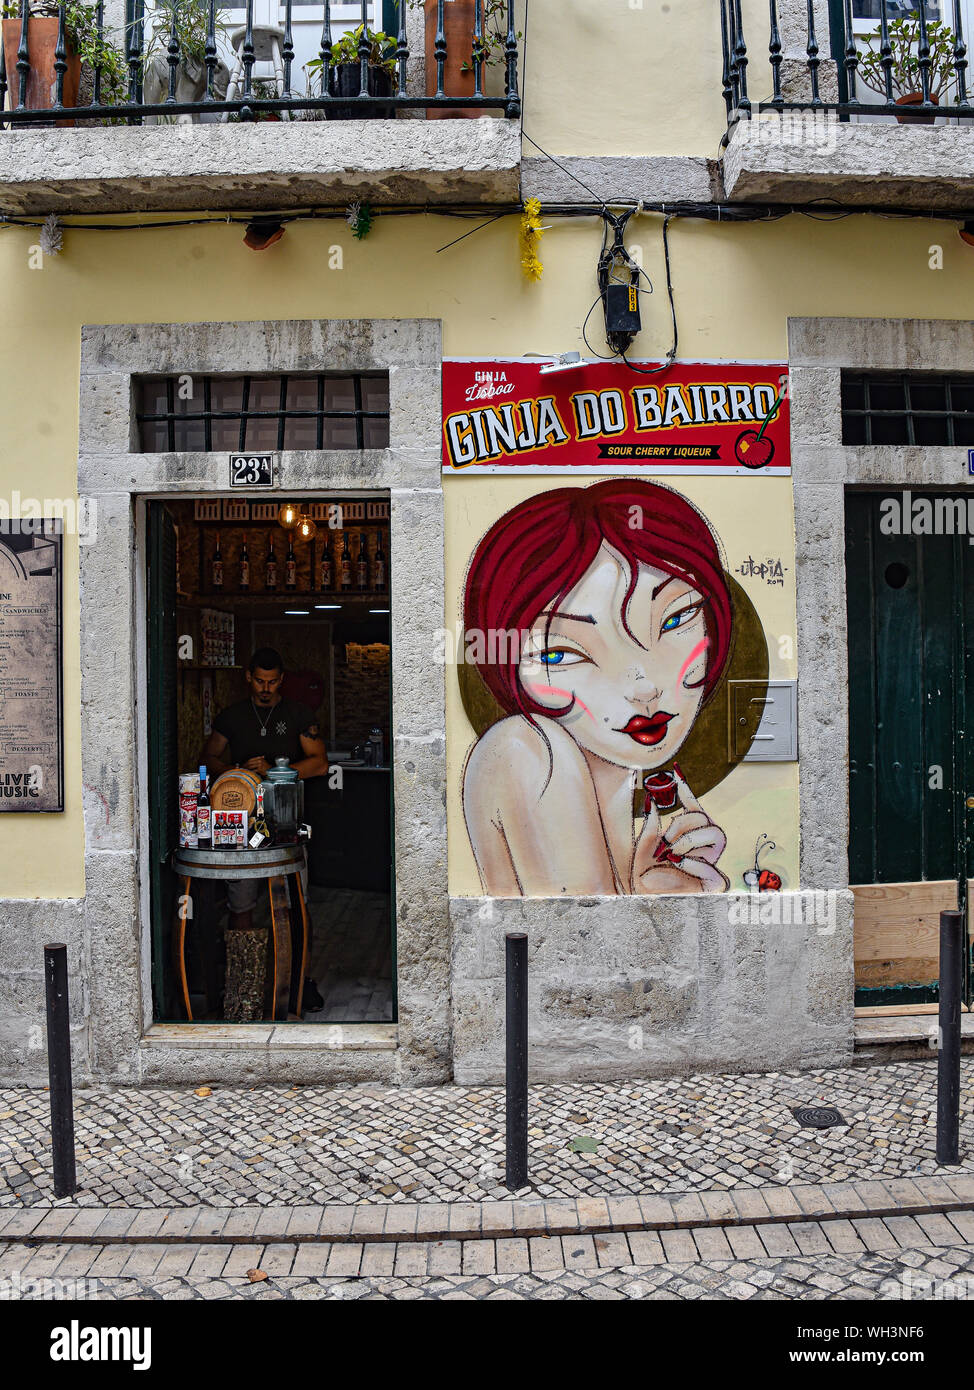 Lisbon, Portugal - July 27, 2019: Advertisement for Ginja, a traditional portuguese Cherry Brandy Stock Photo